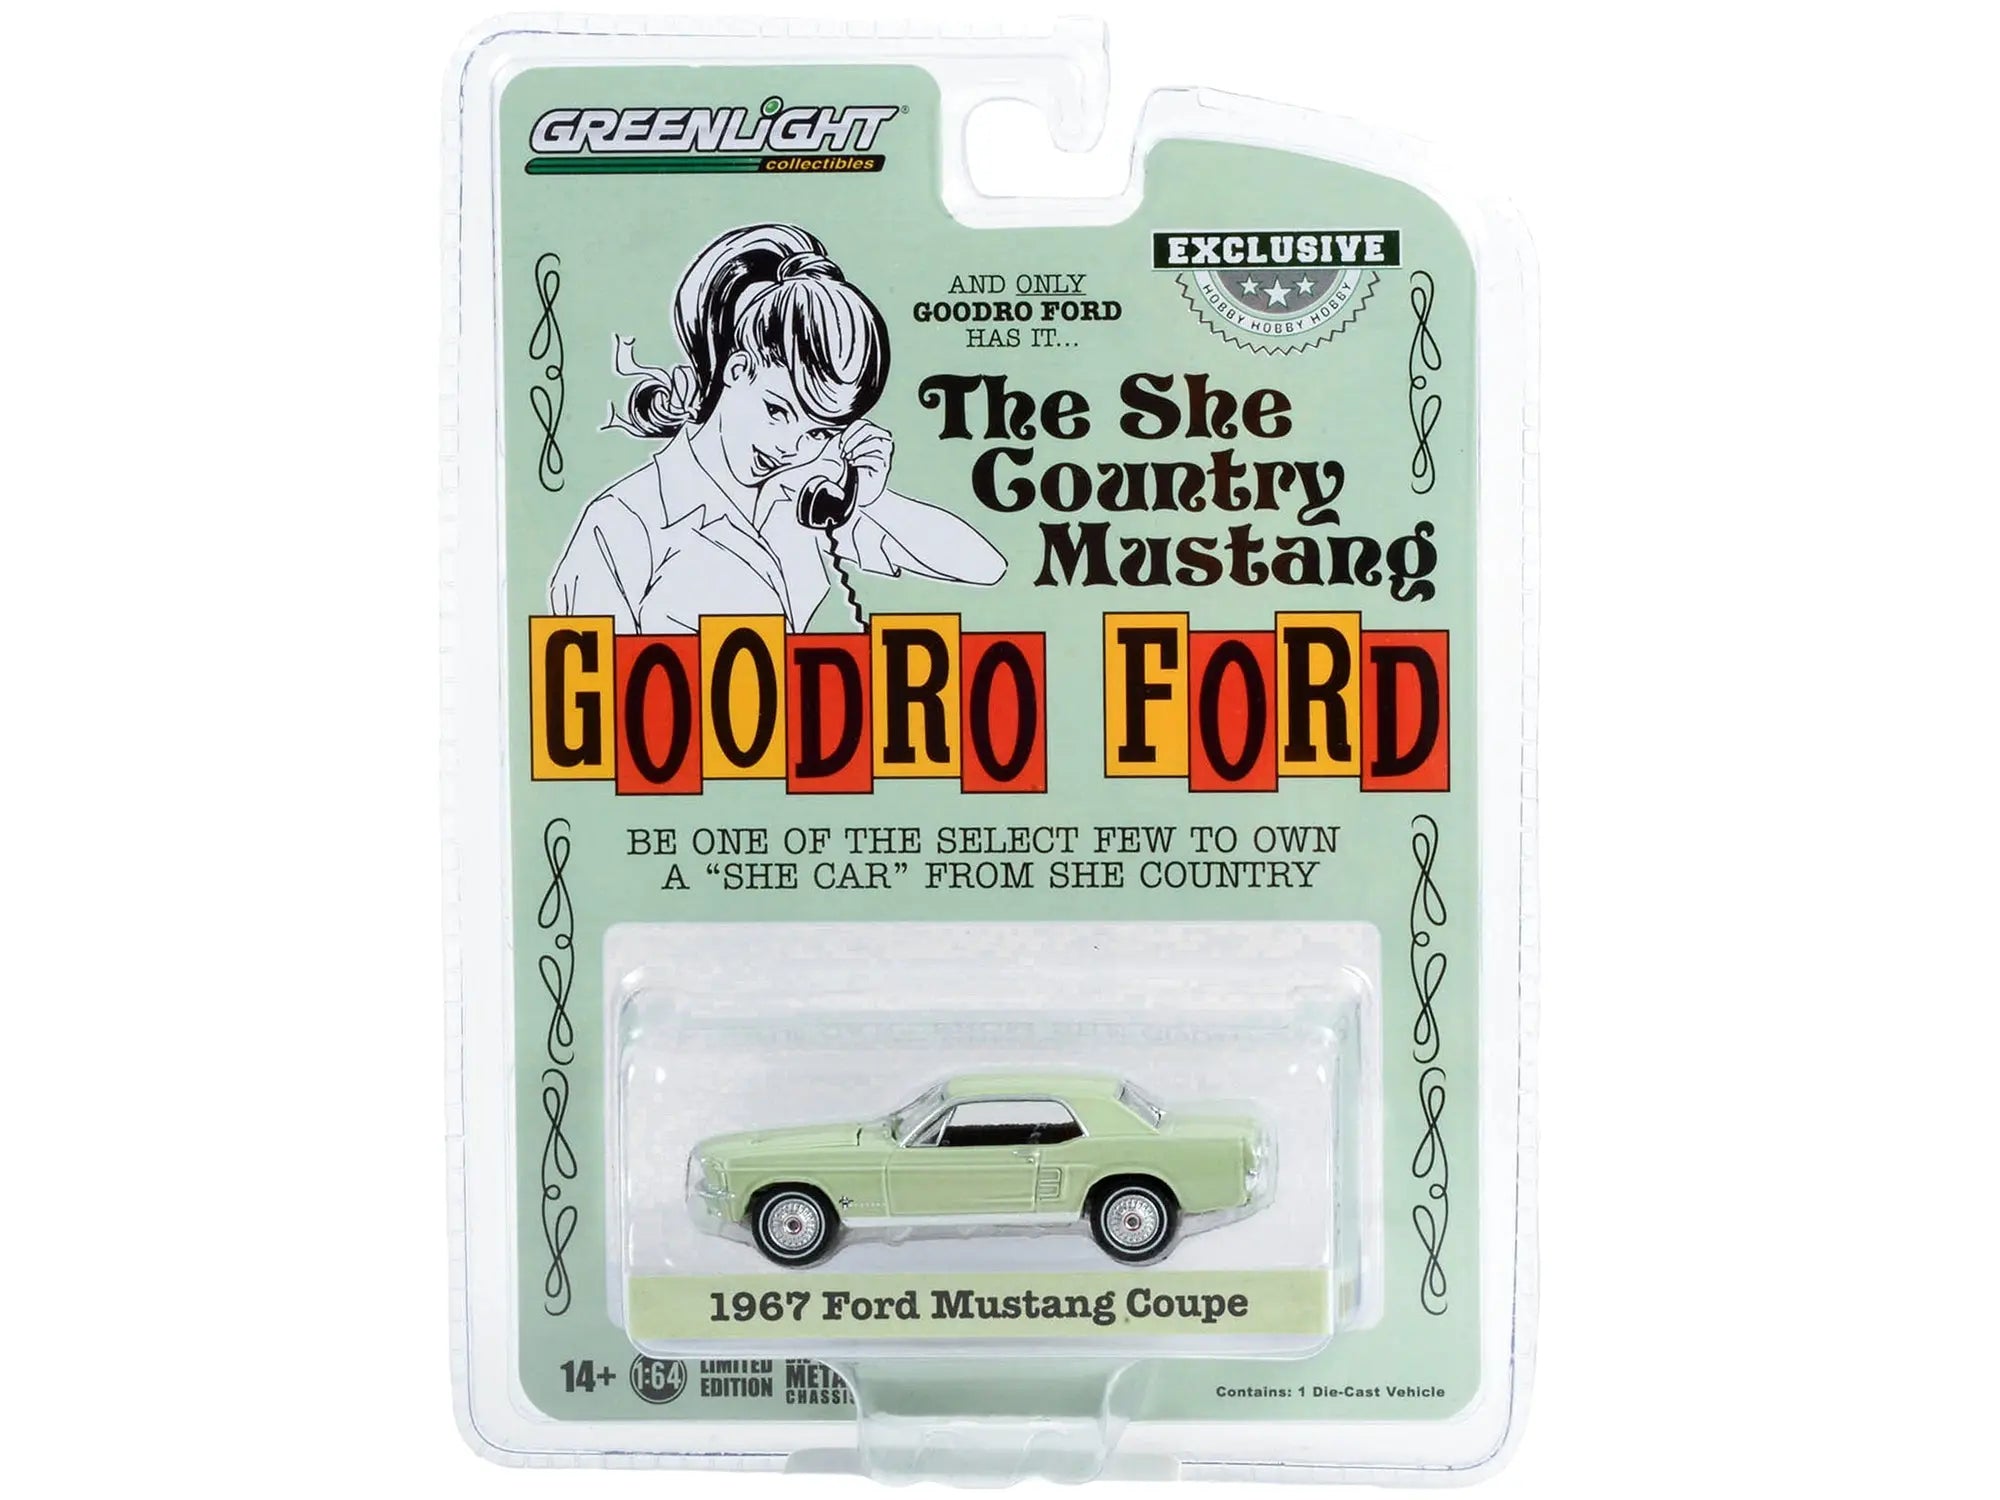 1967 Ford Mustang Limelite Green "She Country Special" "Bill Goodro Ford Denver Colorado" "Hobby Exclusive" Series 1/64 Diecast Model Car by Greenlight Greenlight